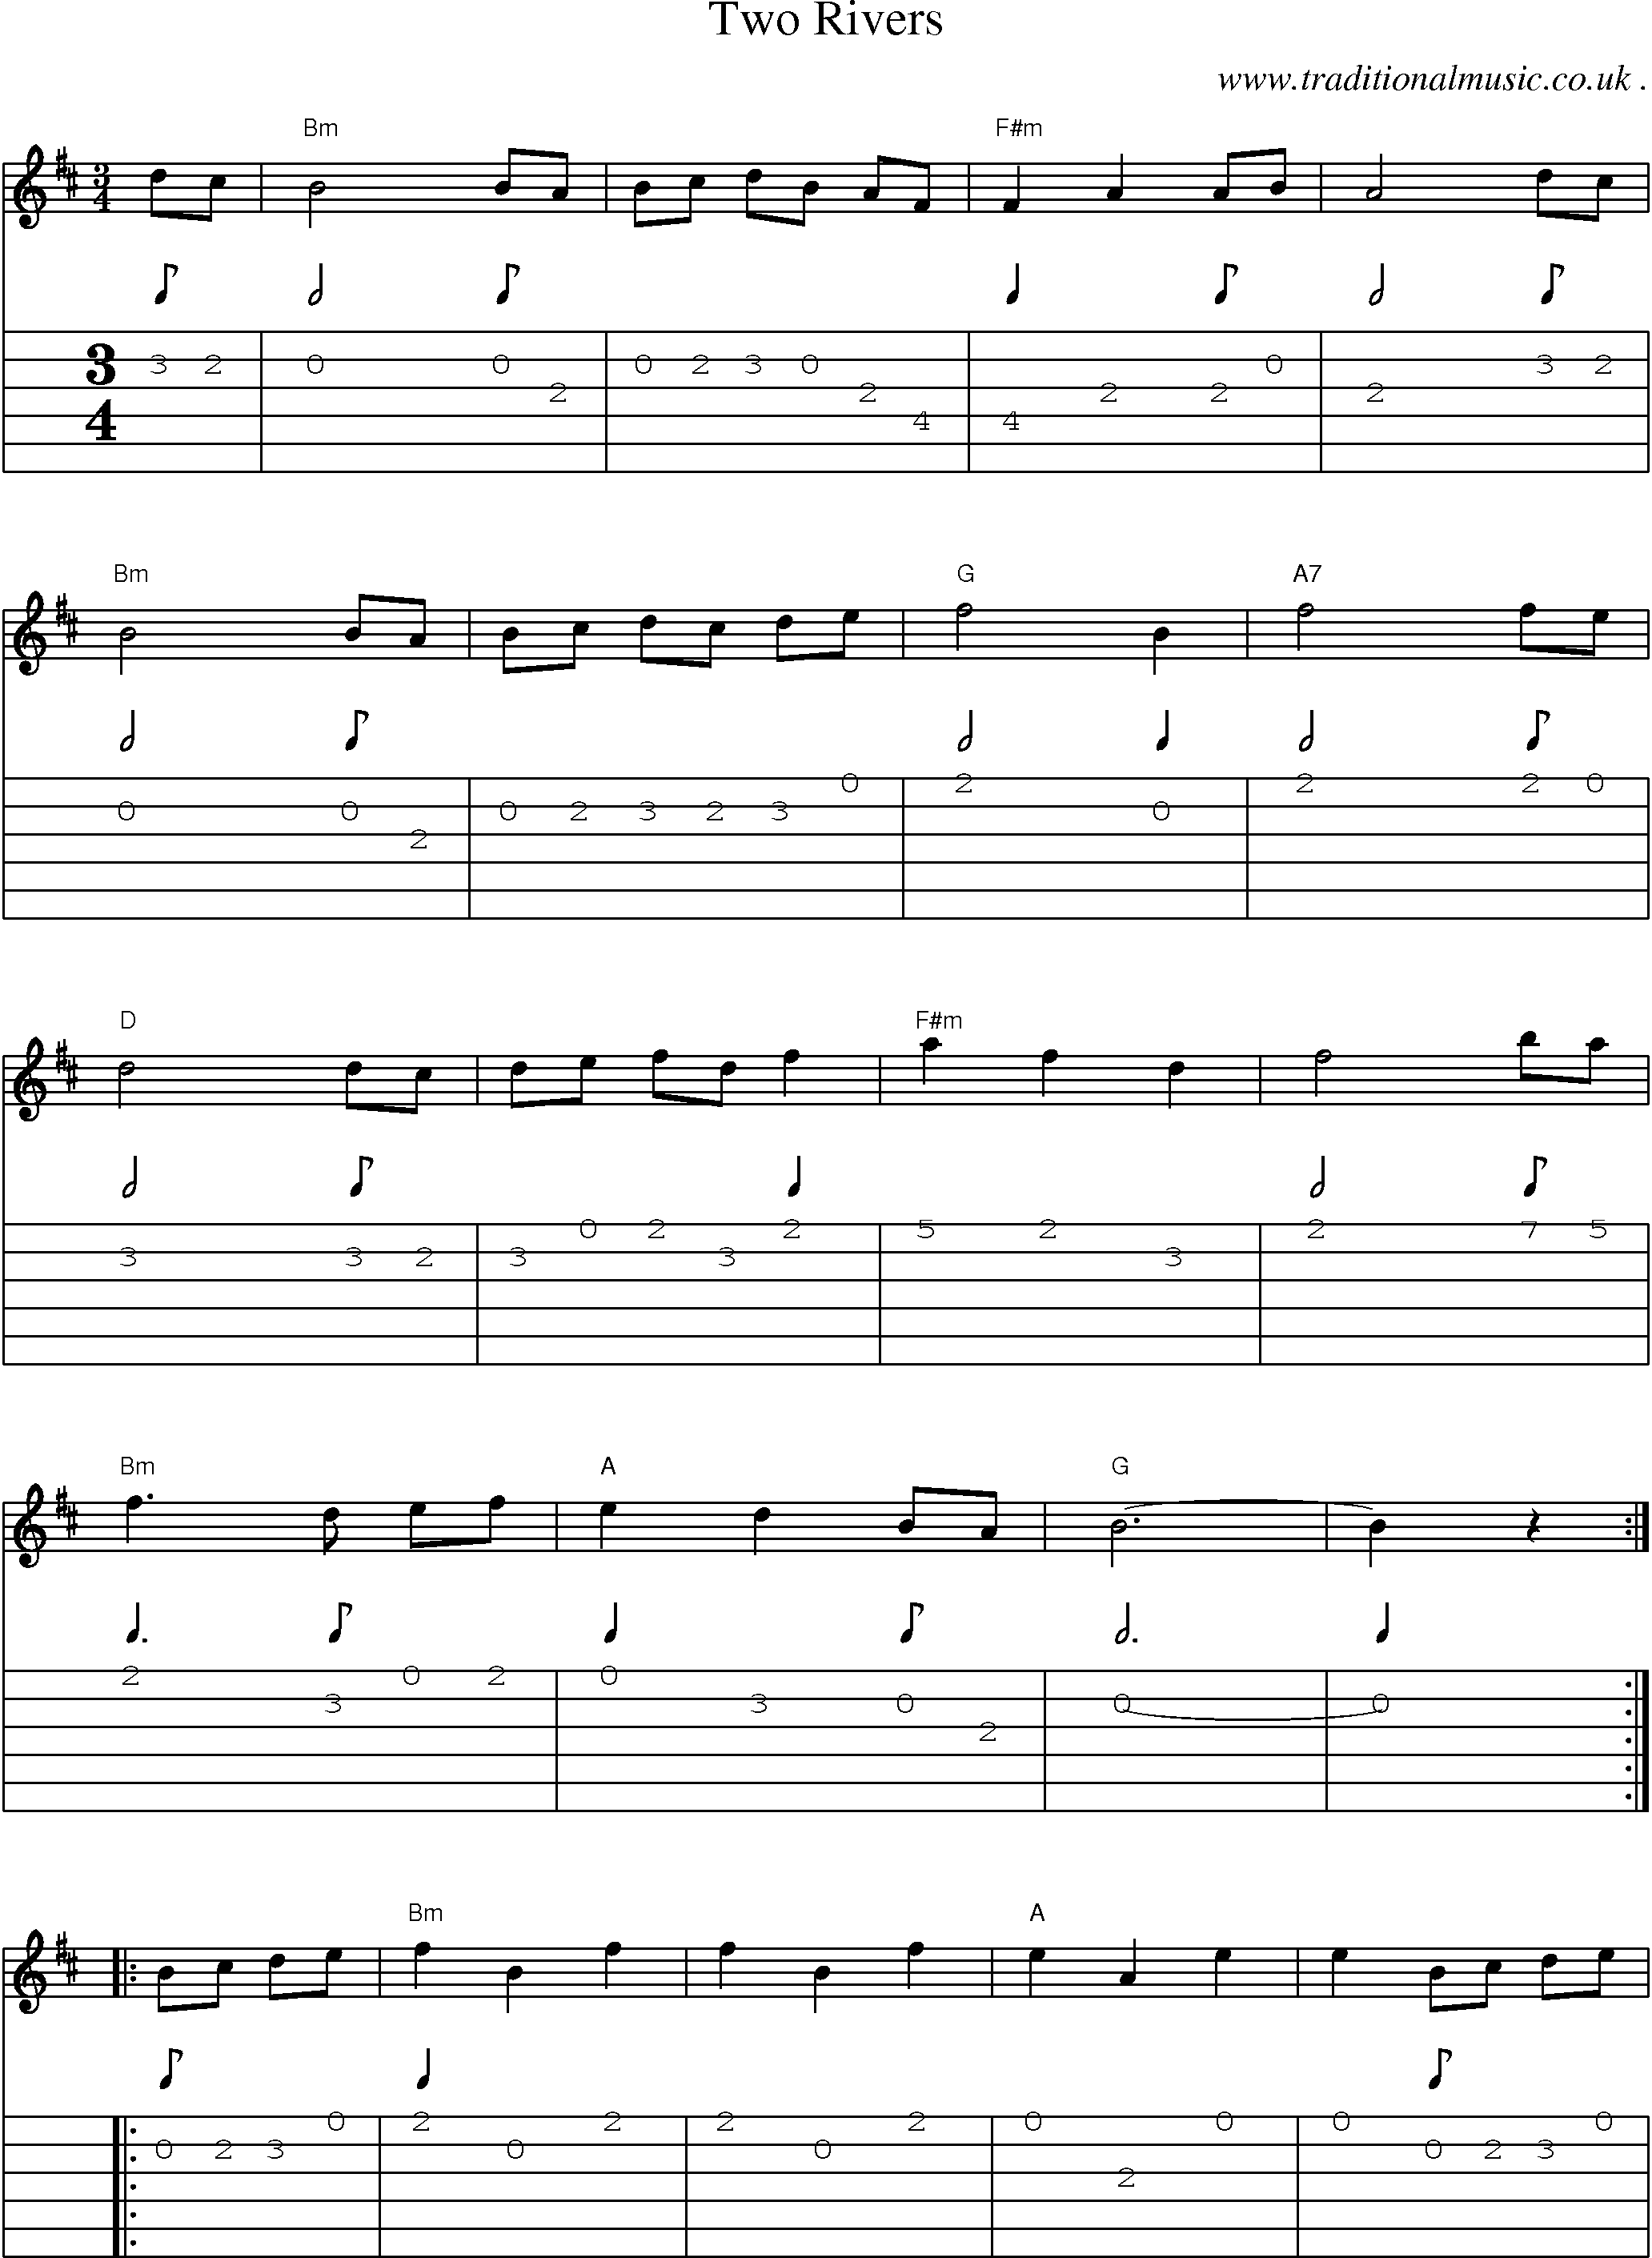 Music Score and Guitar Tabs for Two Rivers